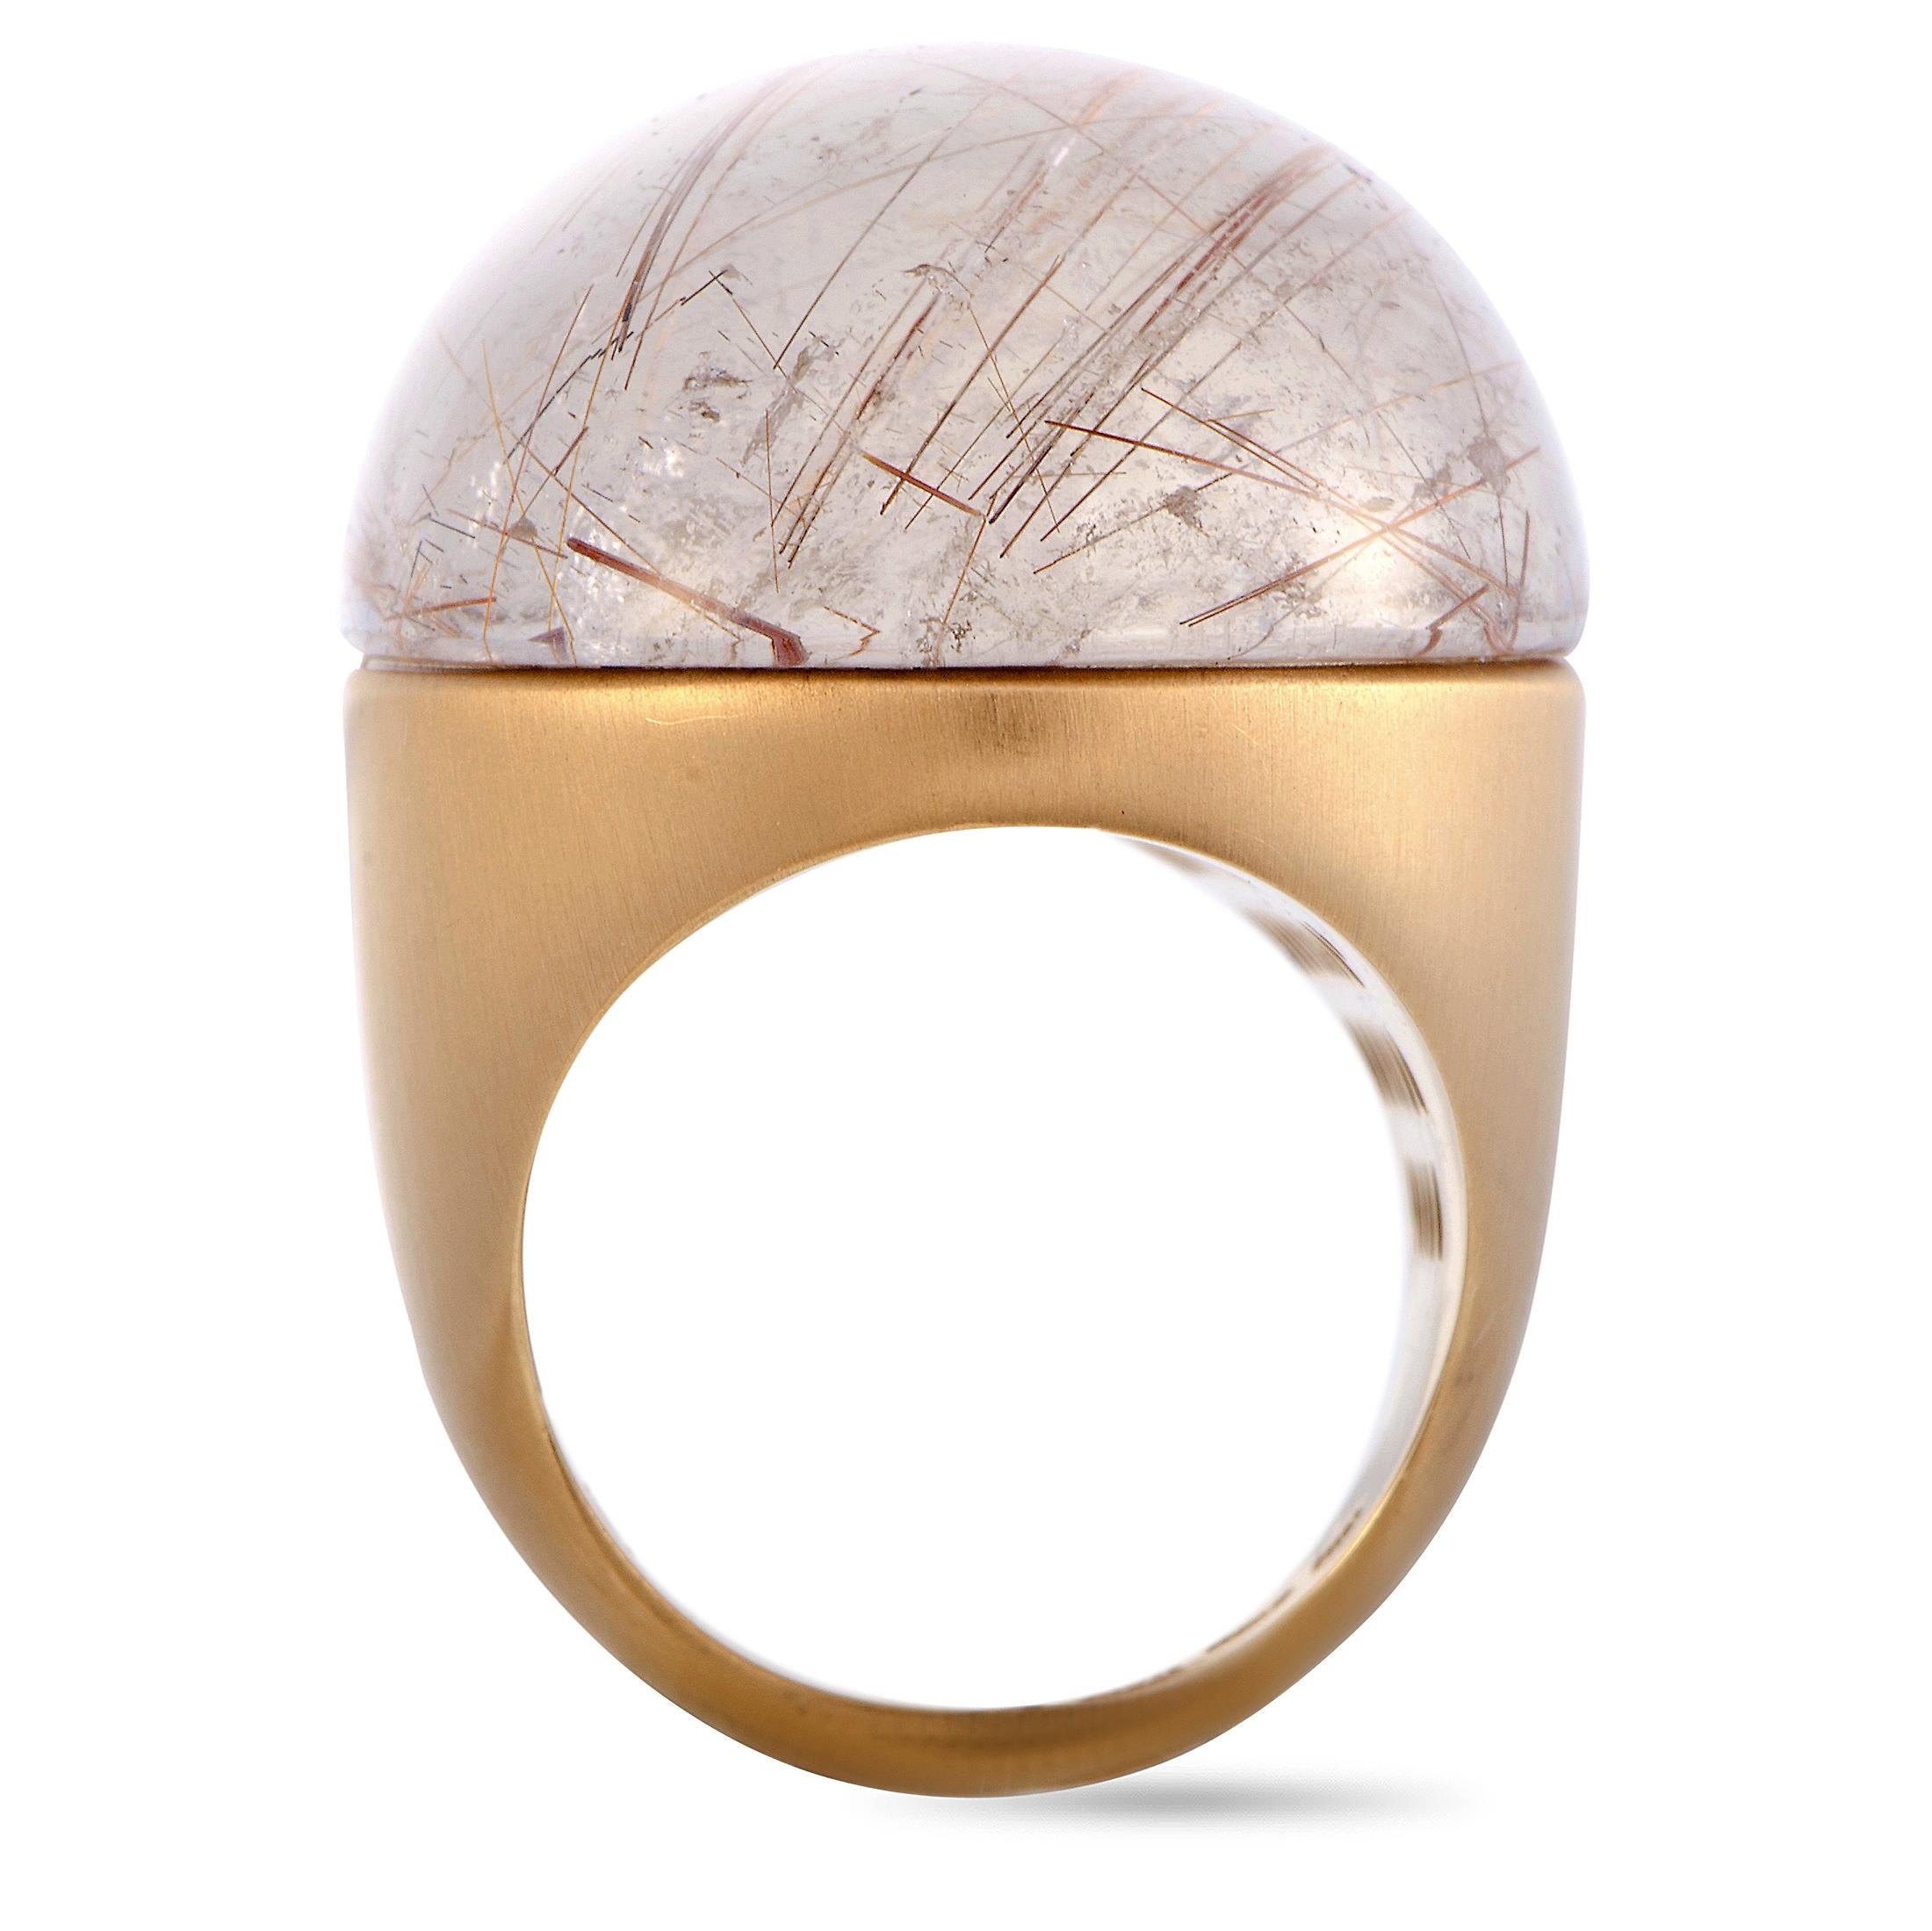 This Roberto Coin ring is crafted from 18K rose gold and set with a rutilated quartz. The ring weighs 32.2 grams, boasting band thickness of 5 mm and top height of 14 mm, while top dimensions measure 32 by 25 mm.

Ring Size: 6.25

Offered in brand